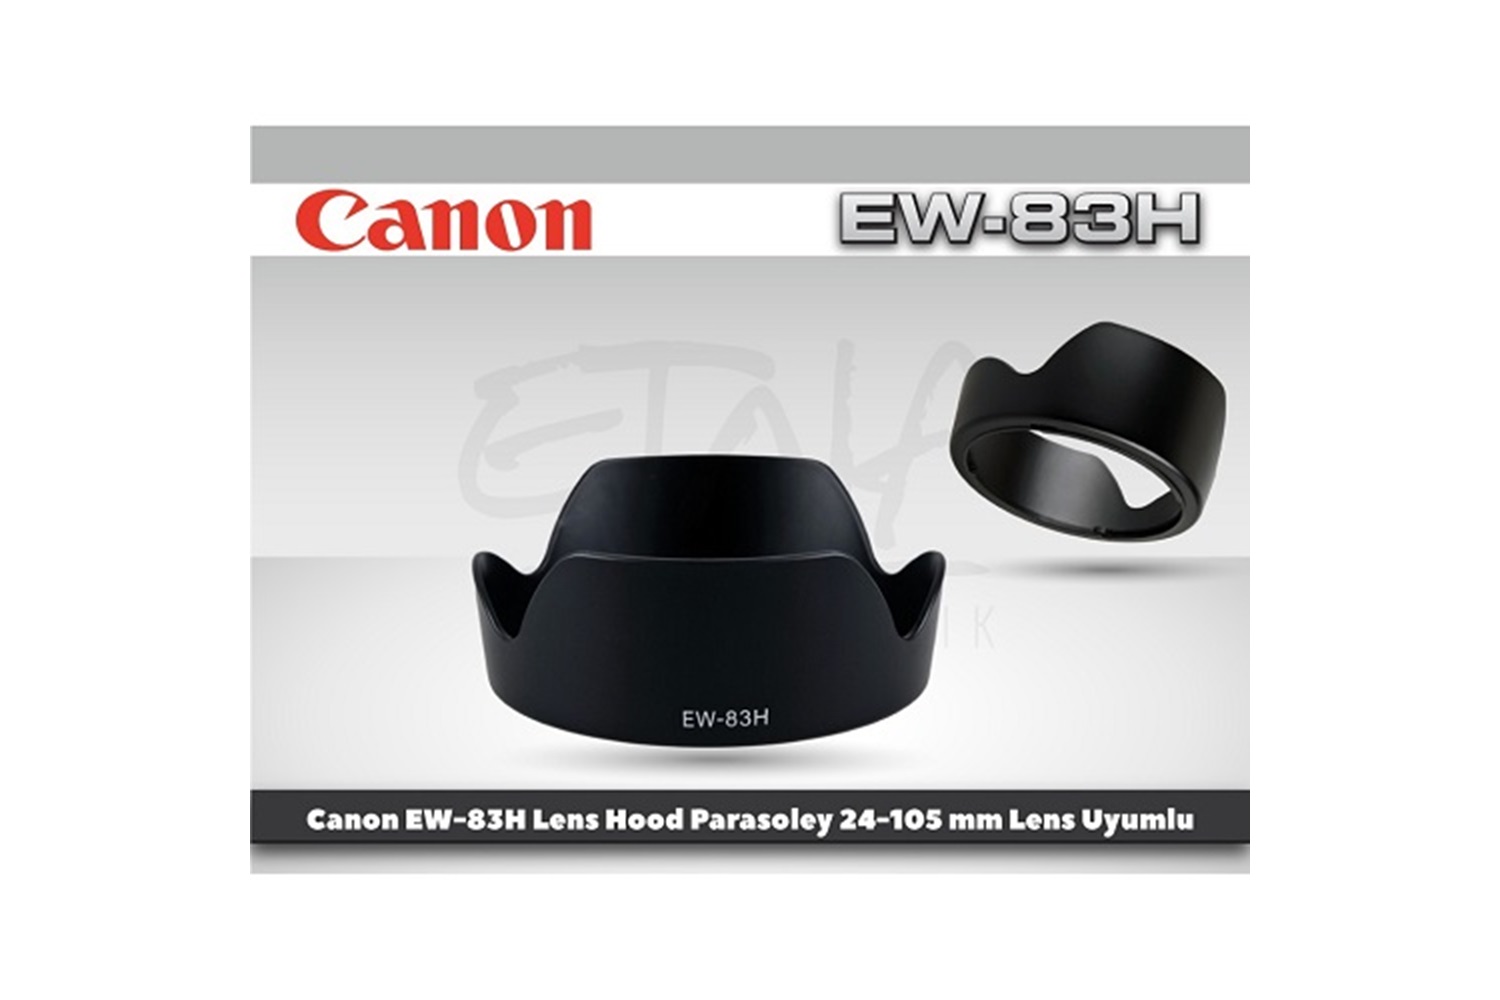 Tewise Canon EW-83H Parasoley 24-105mm F4 L IS Lens Uyumlu